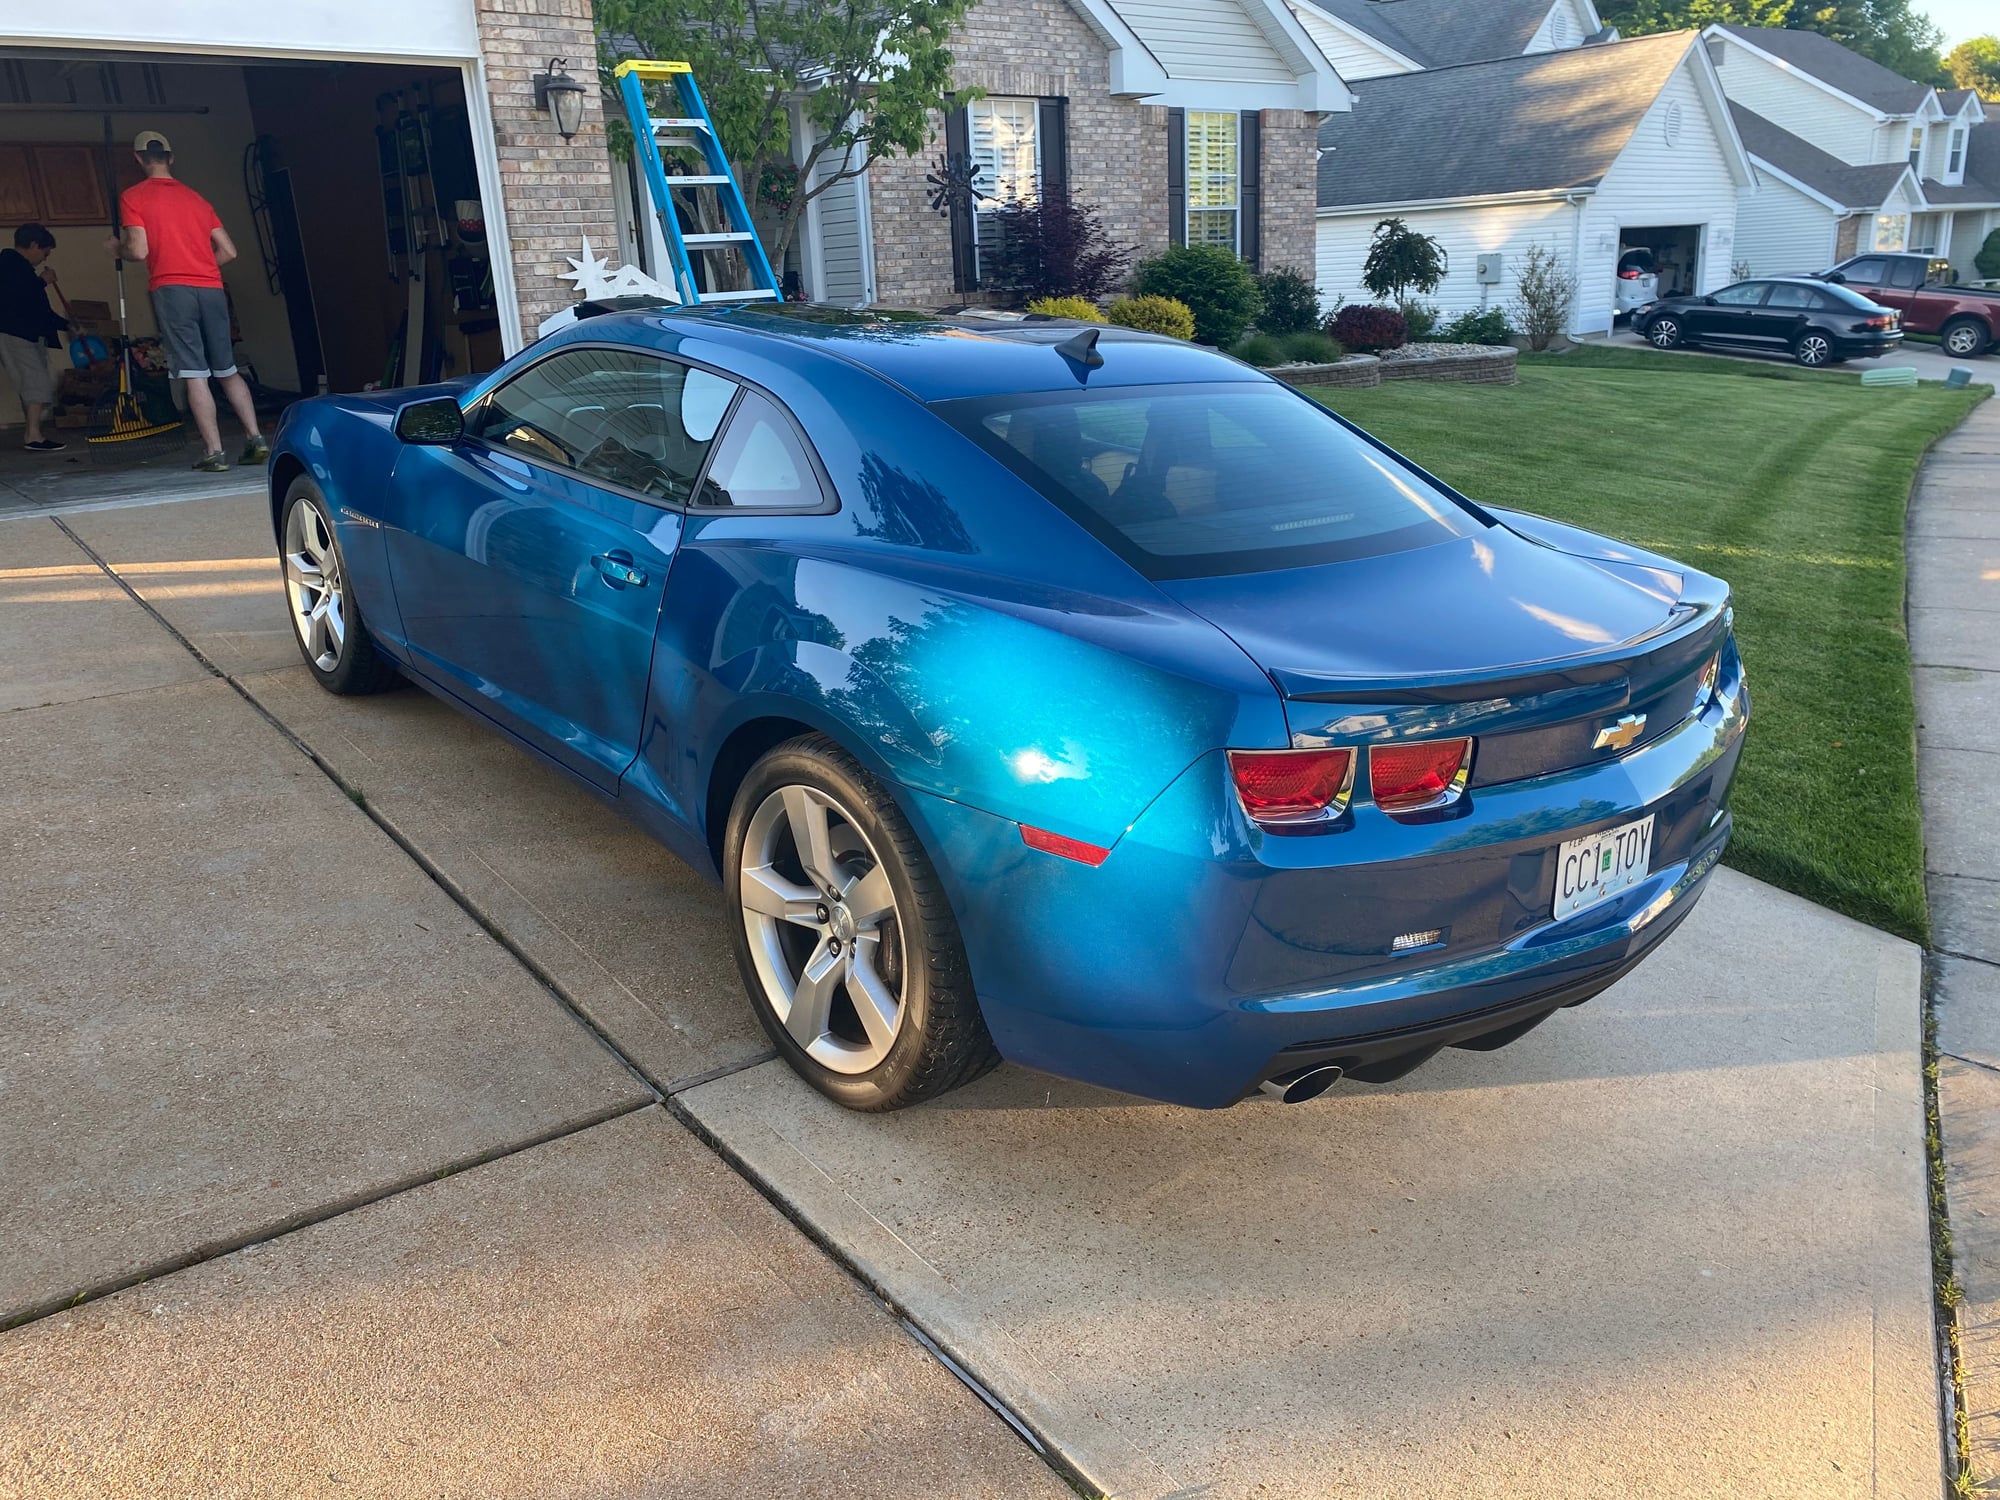 2010 Chevrolet Camaro - 2010 Camaro 1SS 3000 miles - Used - VIN 2g1fs1ew6a9179295 - 3,000 Miles - 8 cyl - 2WD - Manual - Coupe - Blue - St. Louis, MO 63127, United States